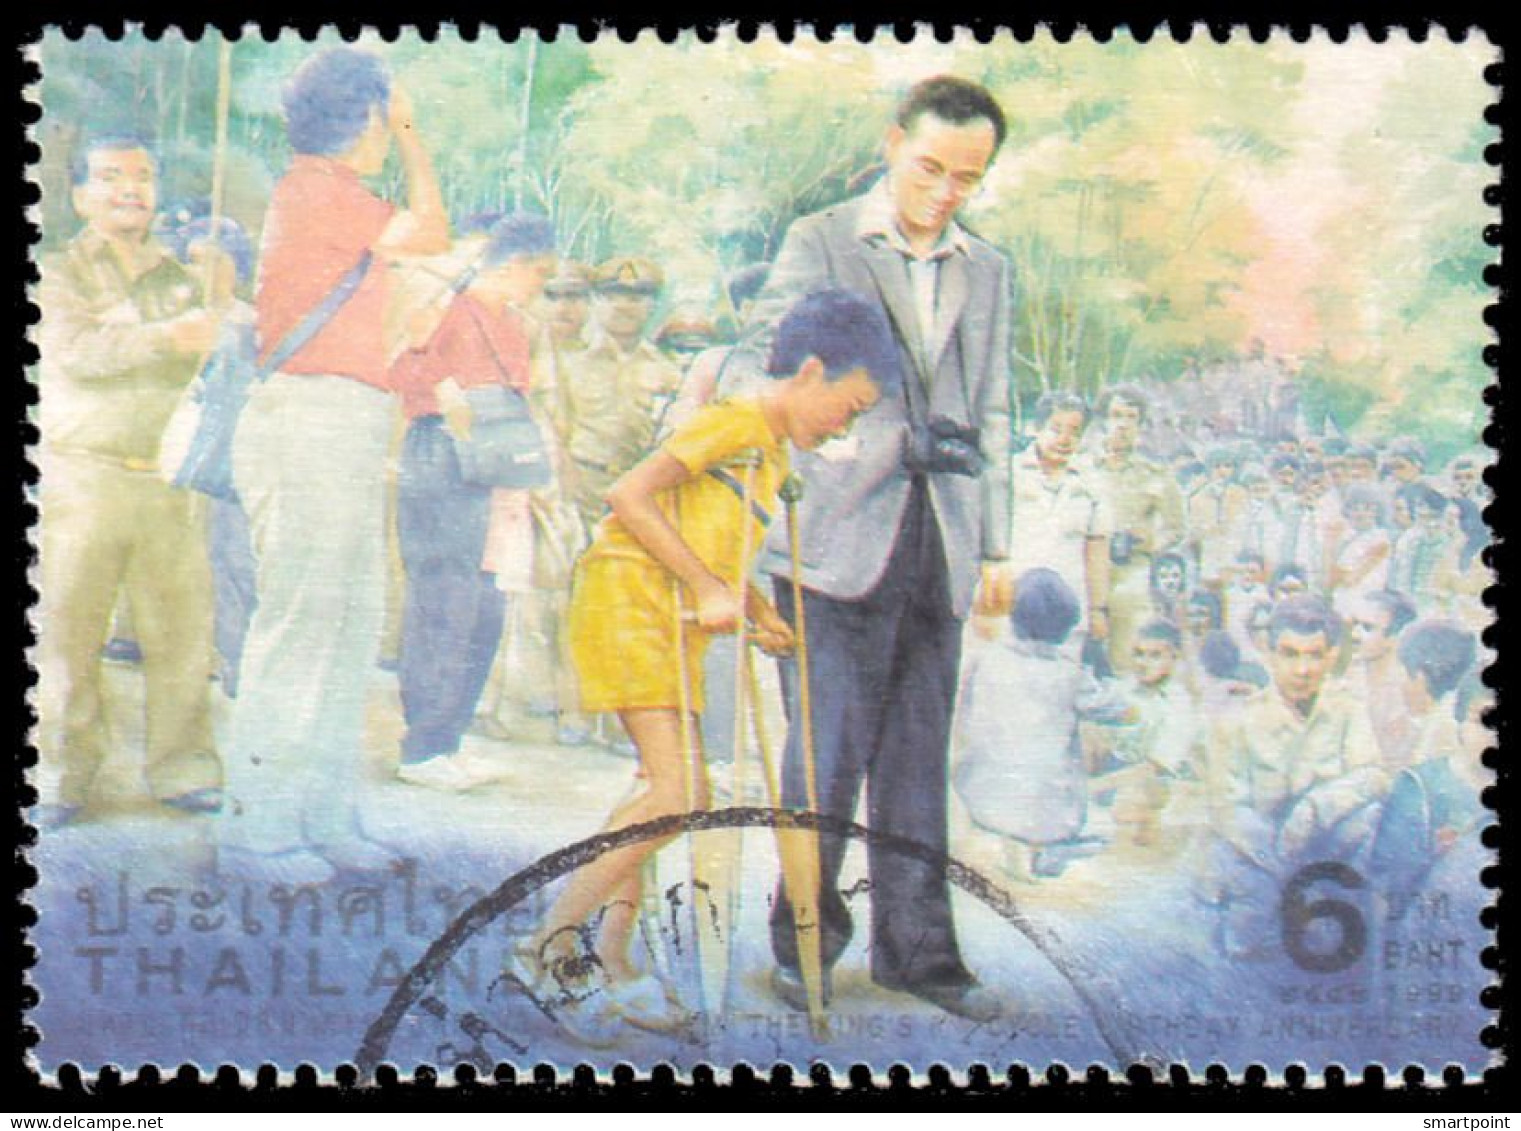 Thailand Stamp 1999 H.M. The King's 6th Cycle Birthday Anniversary (3rd Series) 6 Baht - Used - Thailand